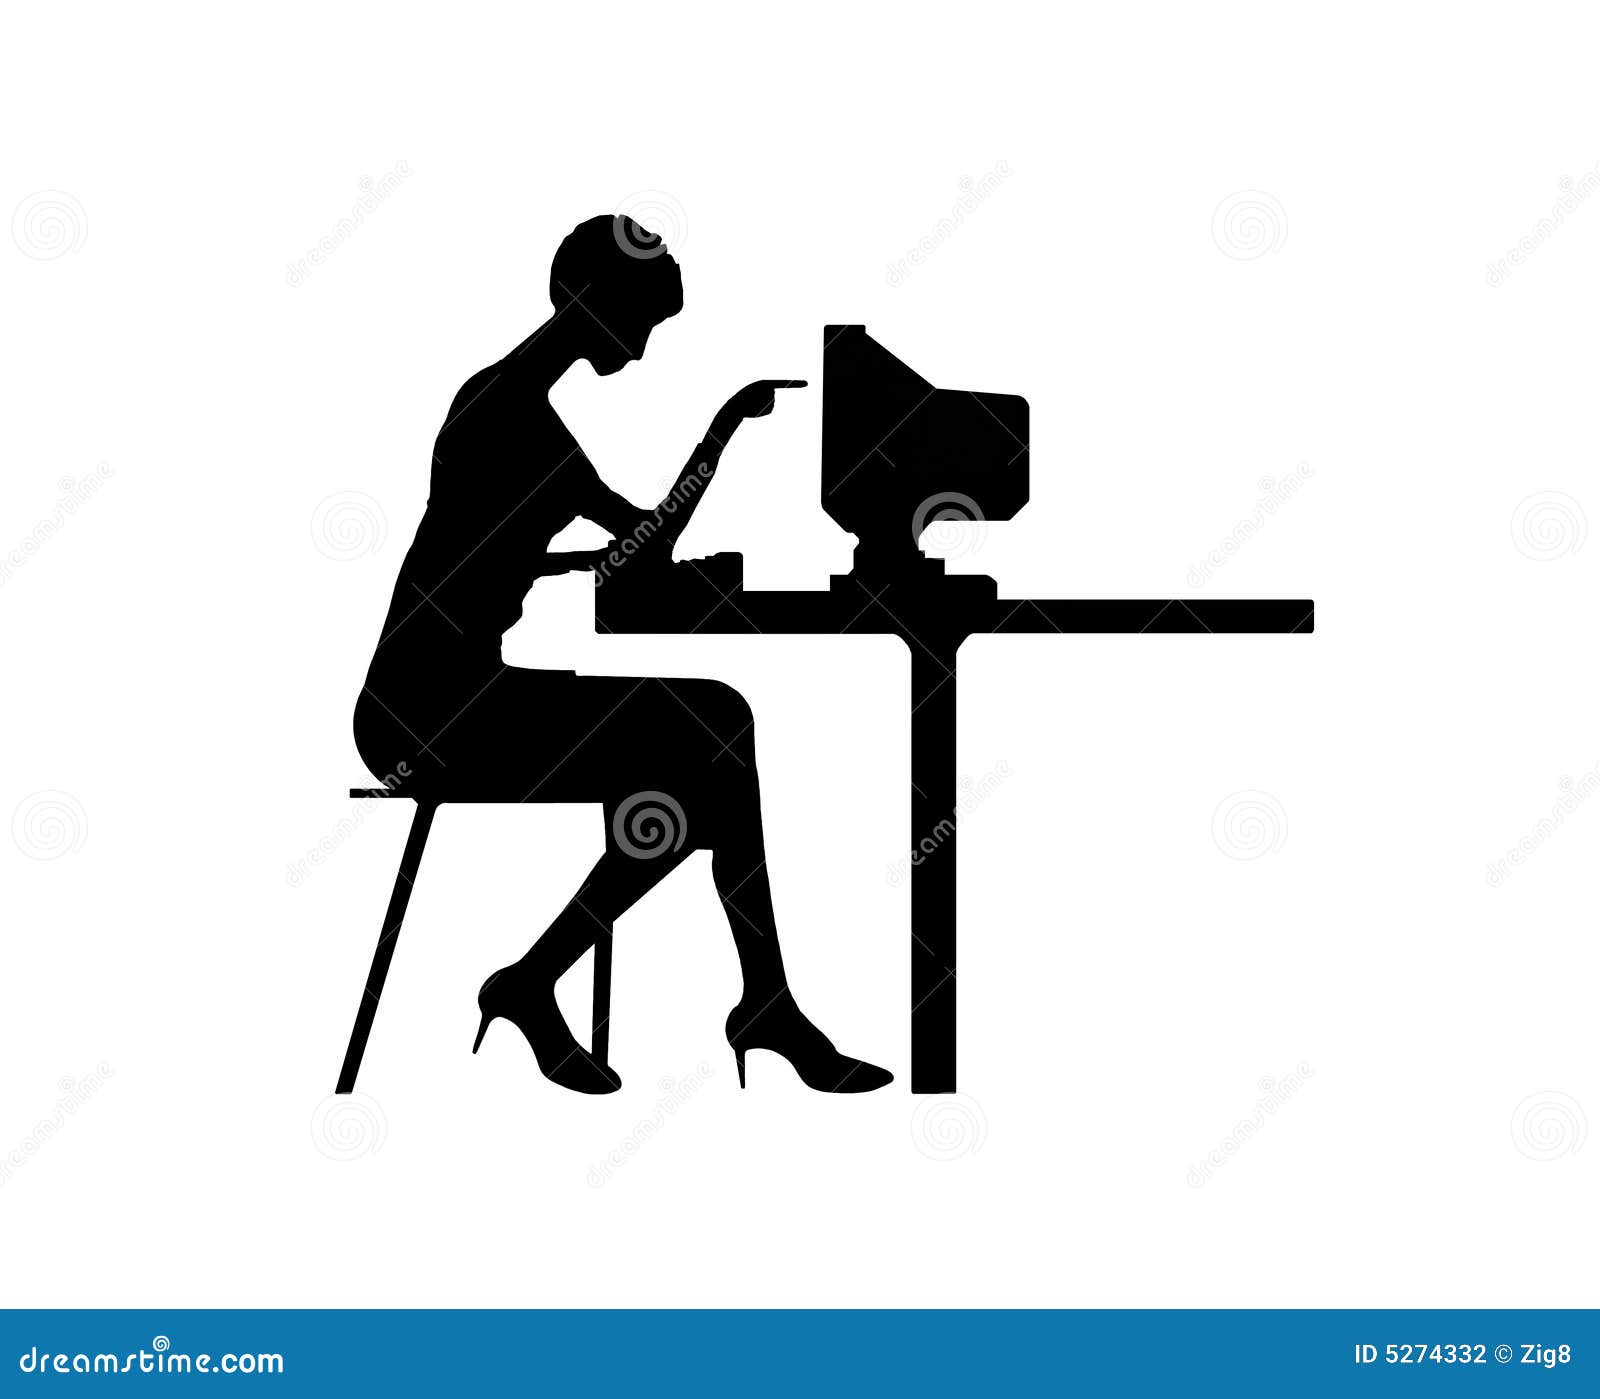 computer typing clipart - photo #38